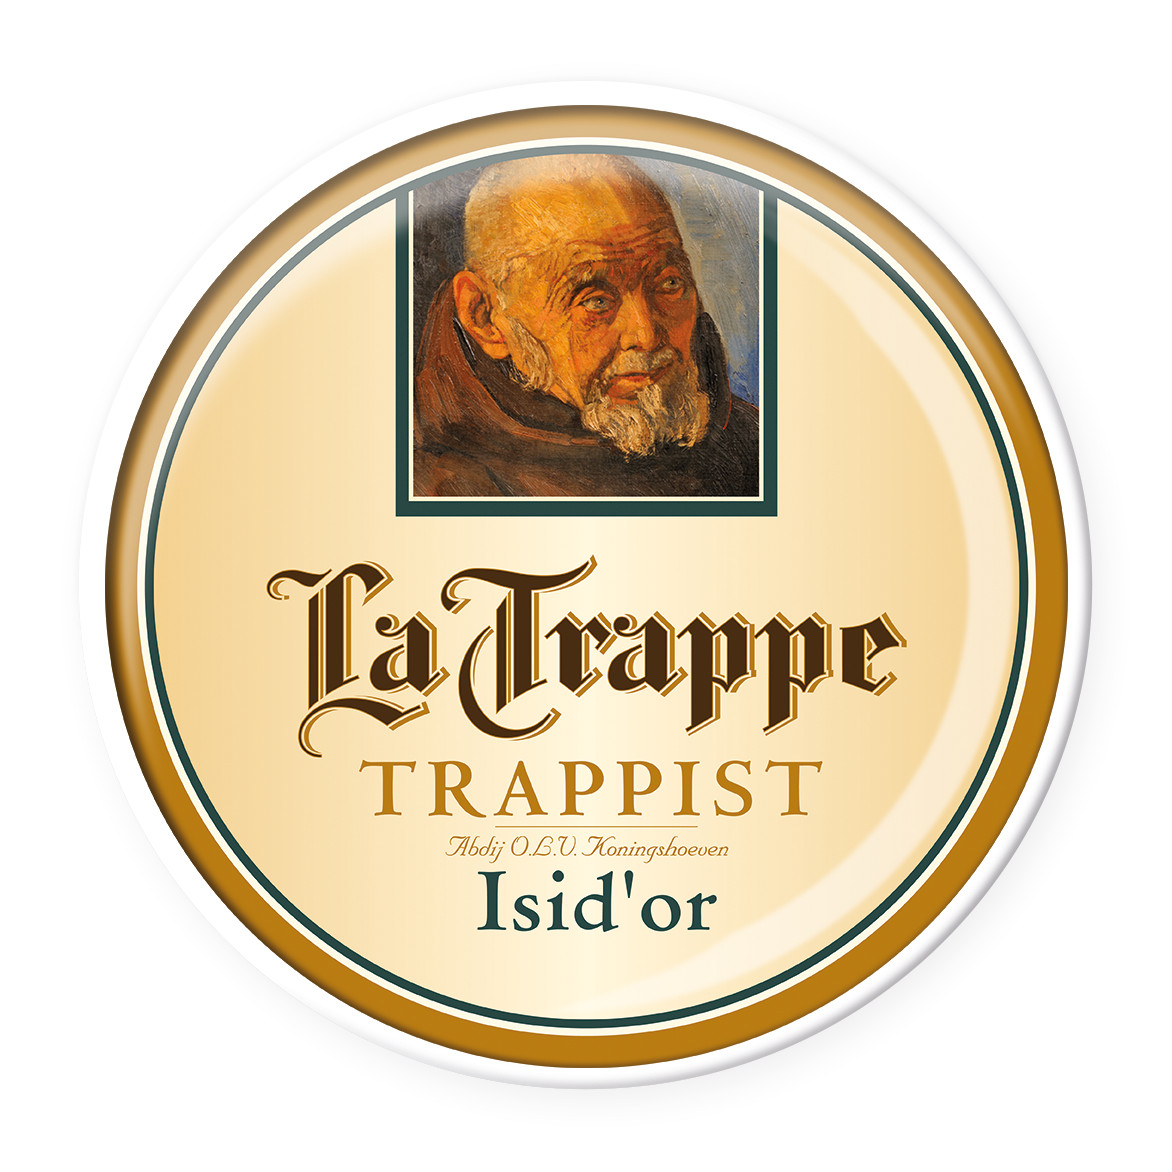 La Trappe Isid'or Fust 20 ltr 7,5%